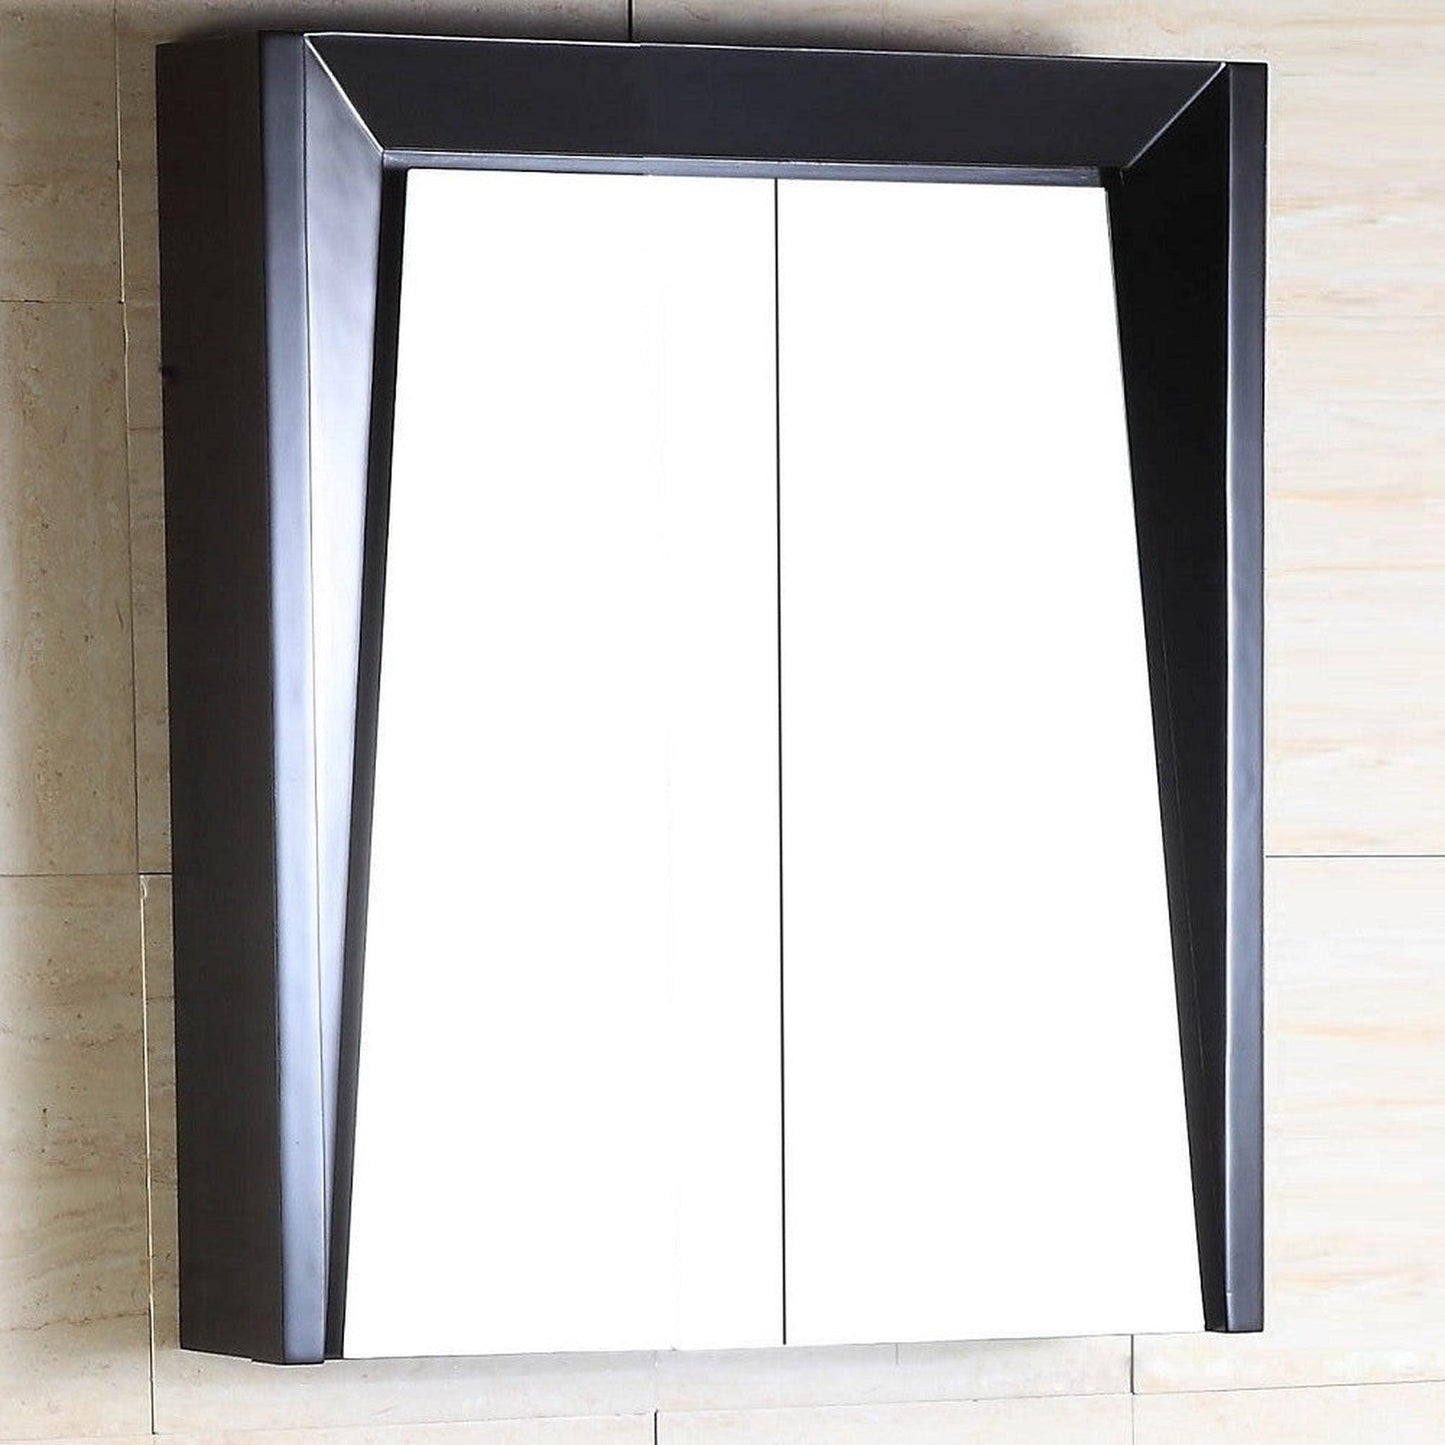 Bellaterra Home 24" x 26" Dark Espresso Angled Wall-Mounted Solid Wood Framed Mirror Cabinet